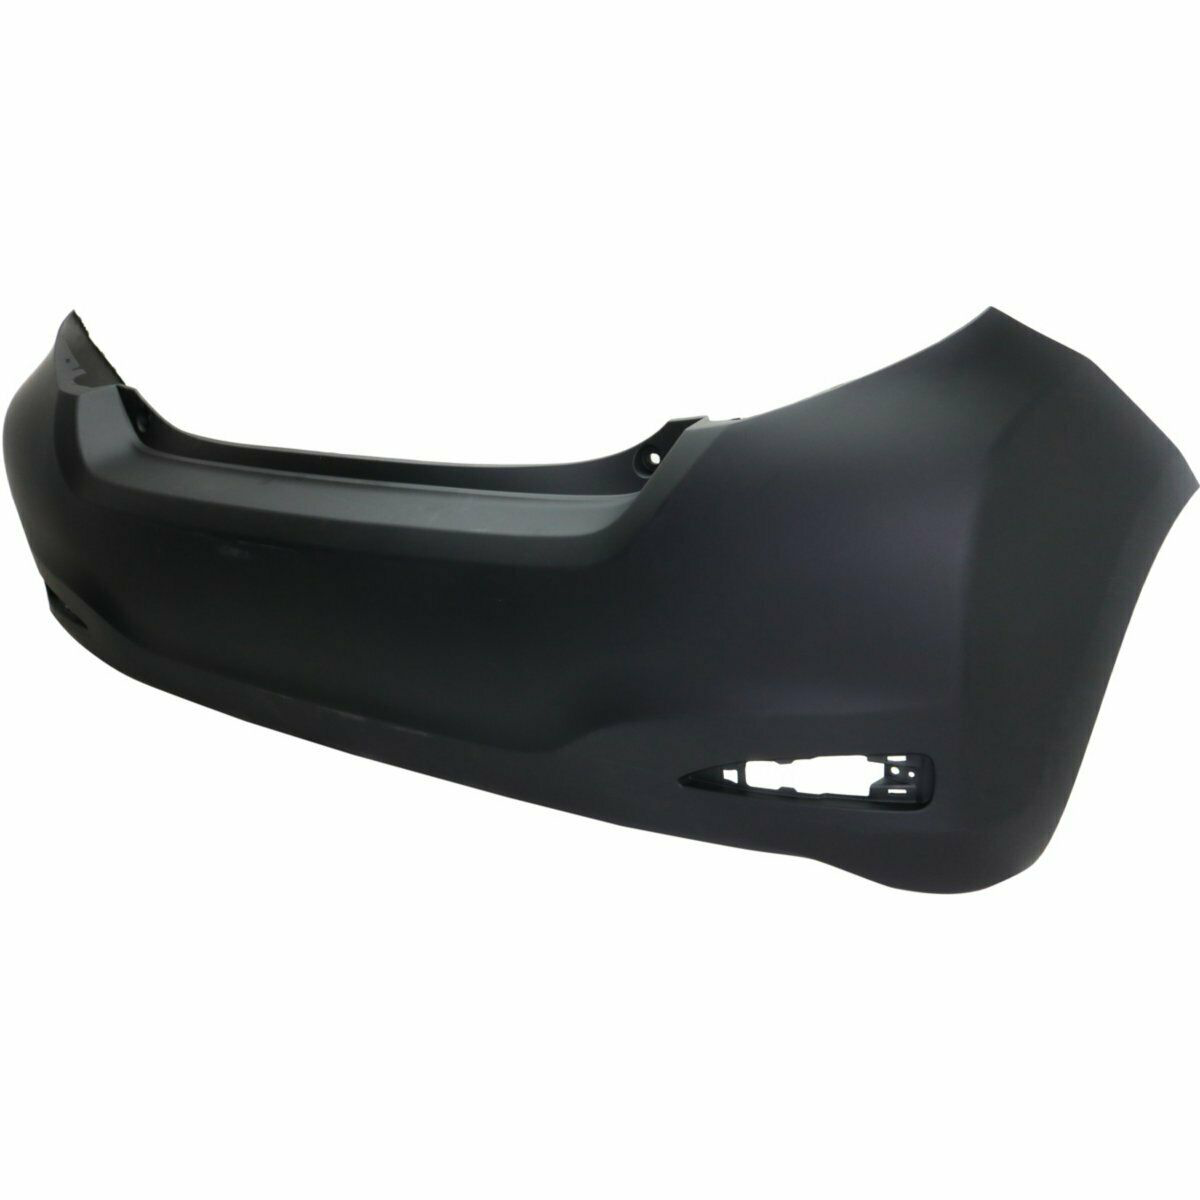 2012-2013 Toyota Yaris Hatchback Rear Bumper Painted to Match